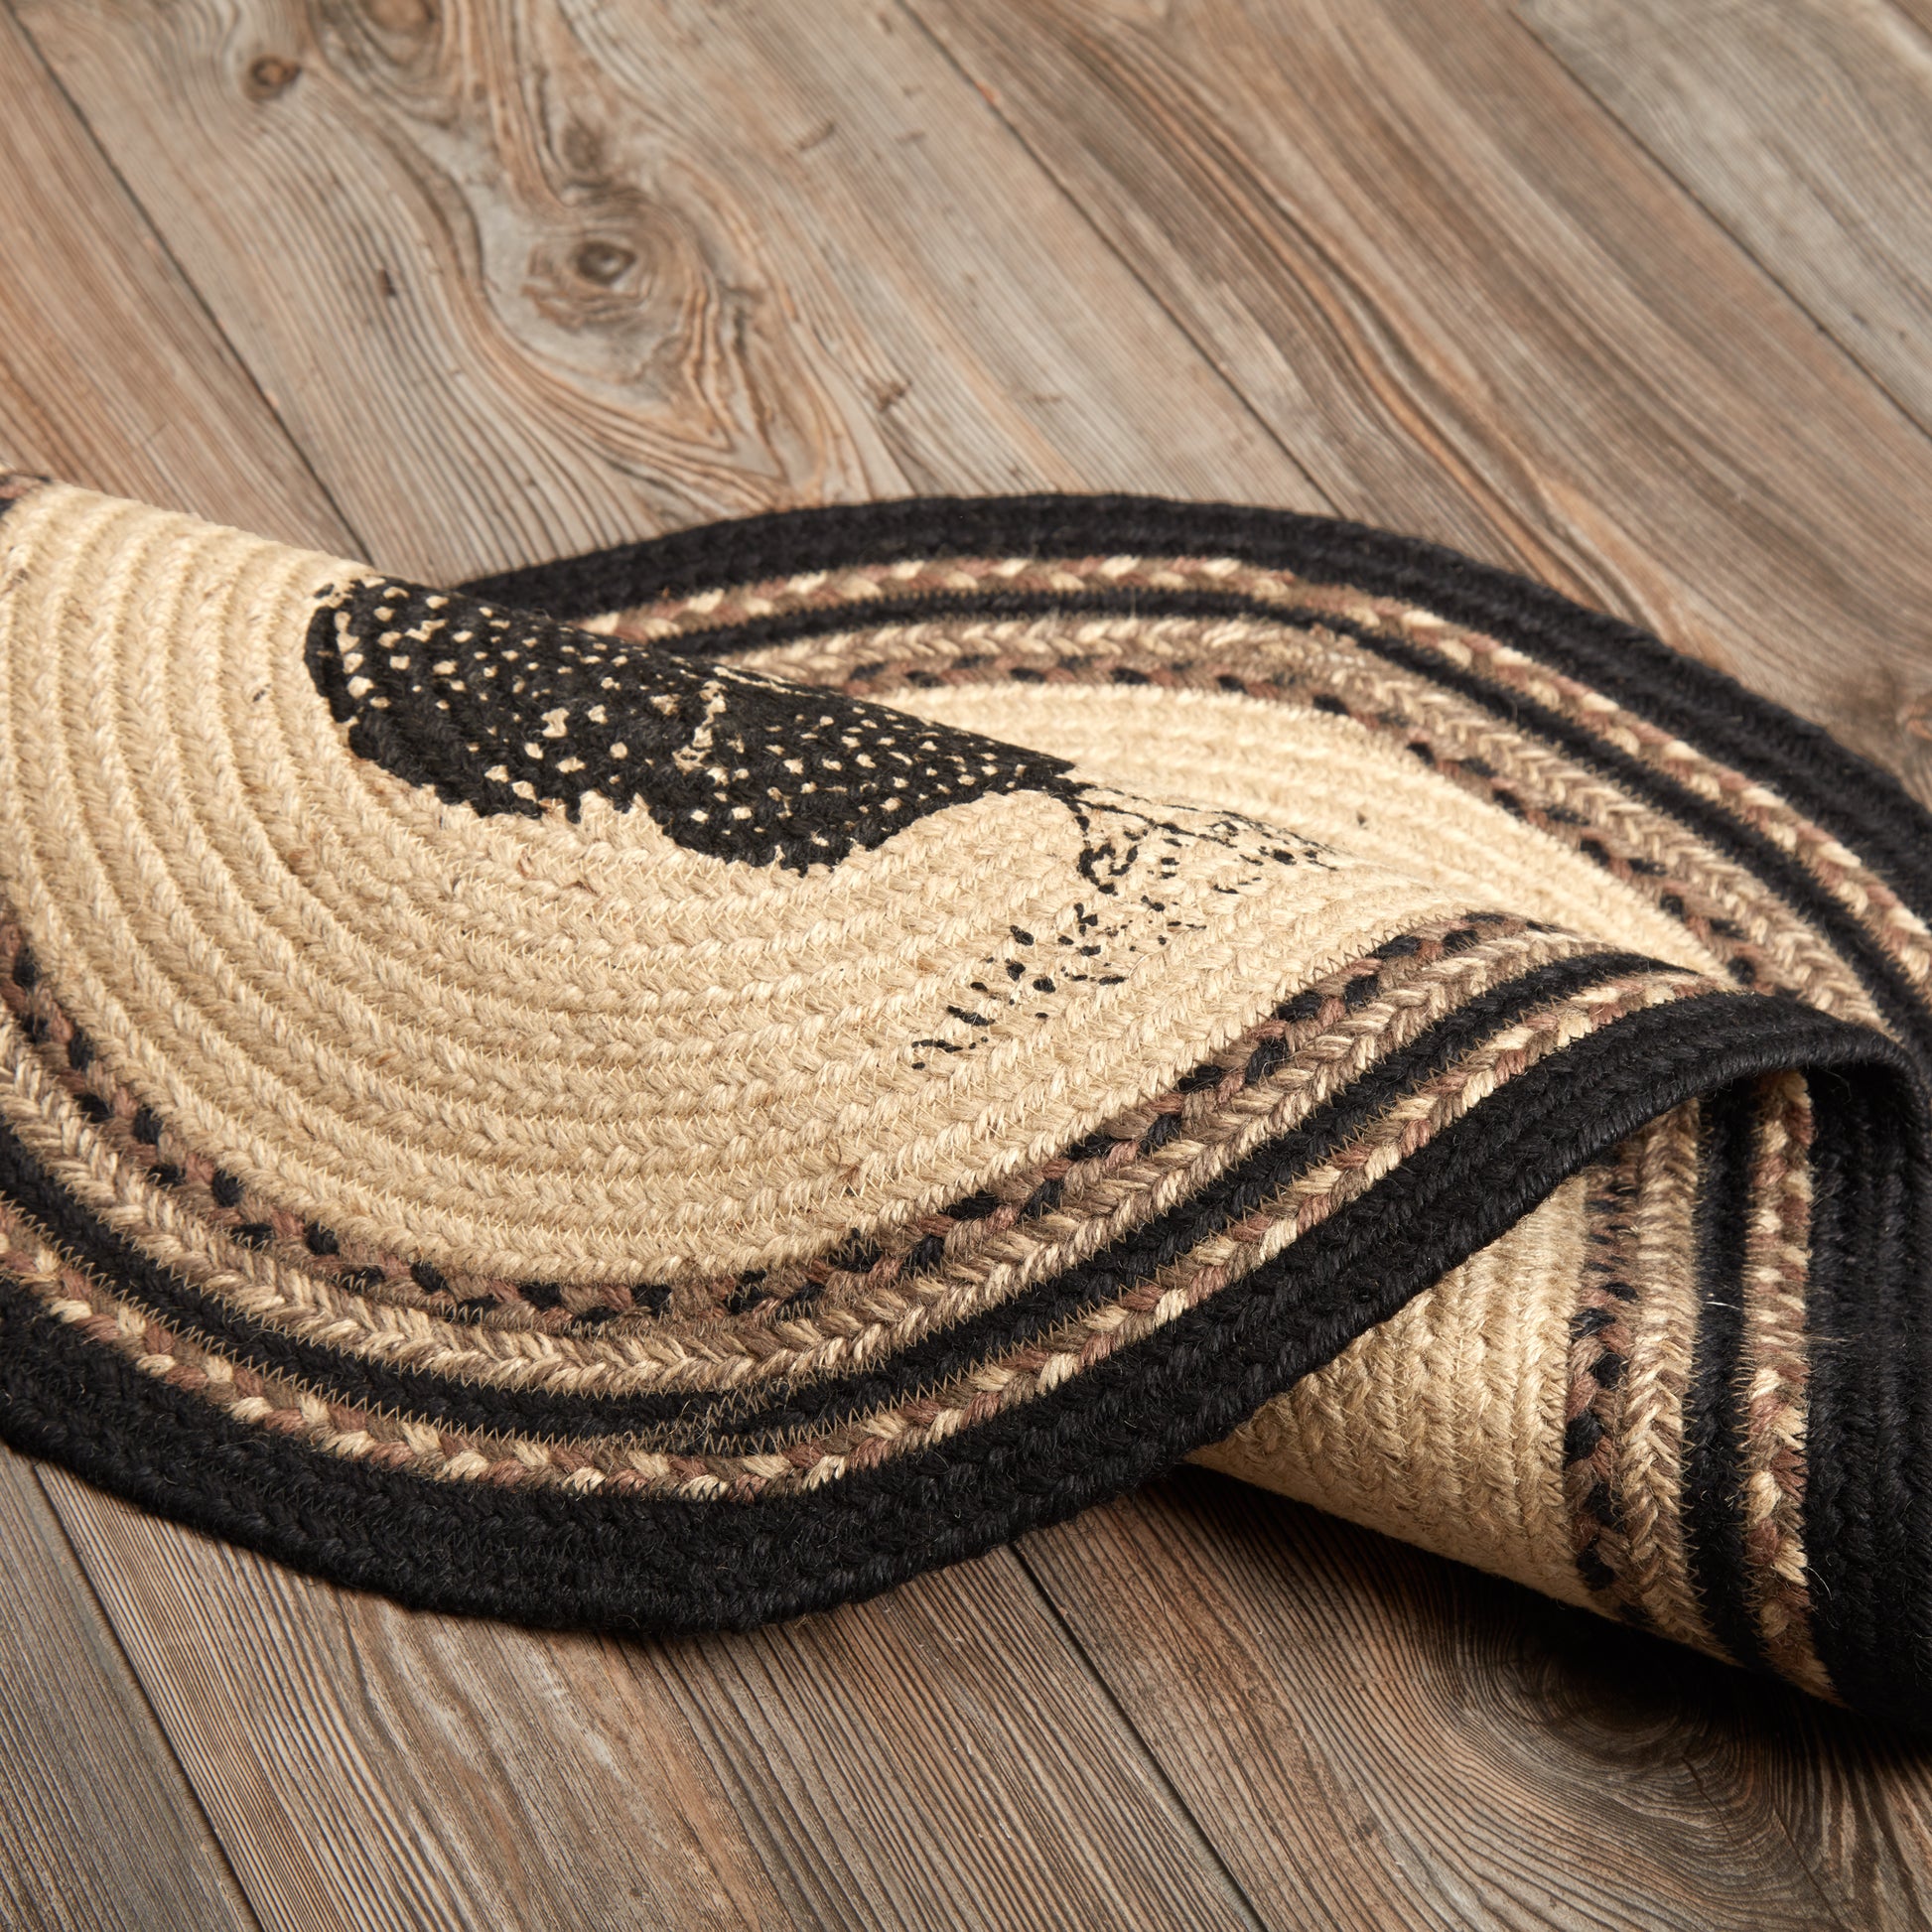 69391-Sawyer-Mill-Charcoal-Poultry-Jute-Rug-Oval-w-Pad-20x30-image-11